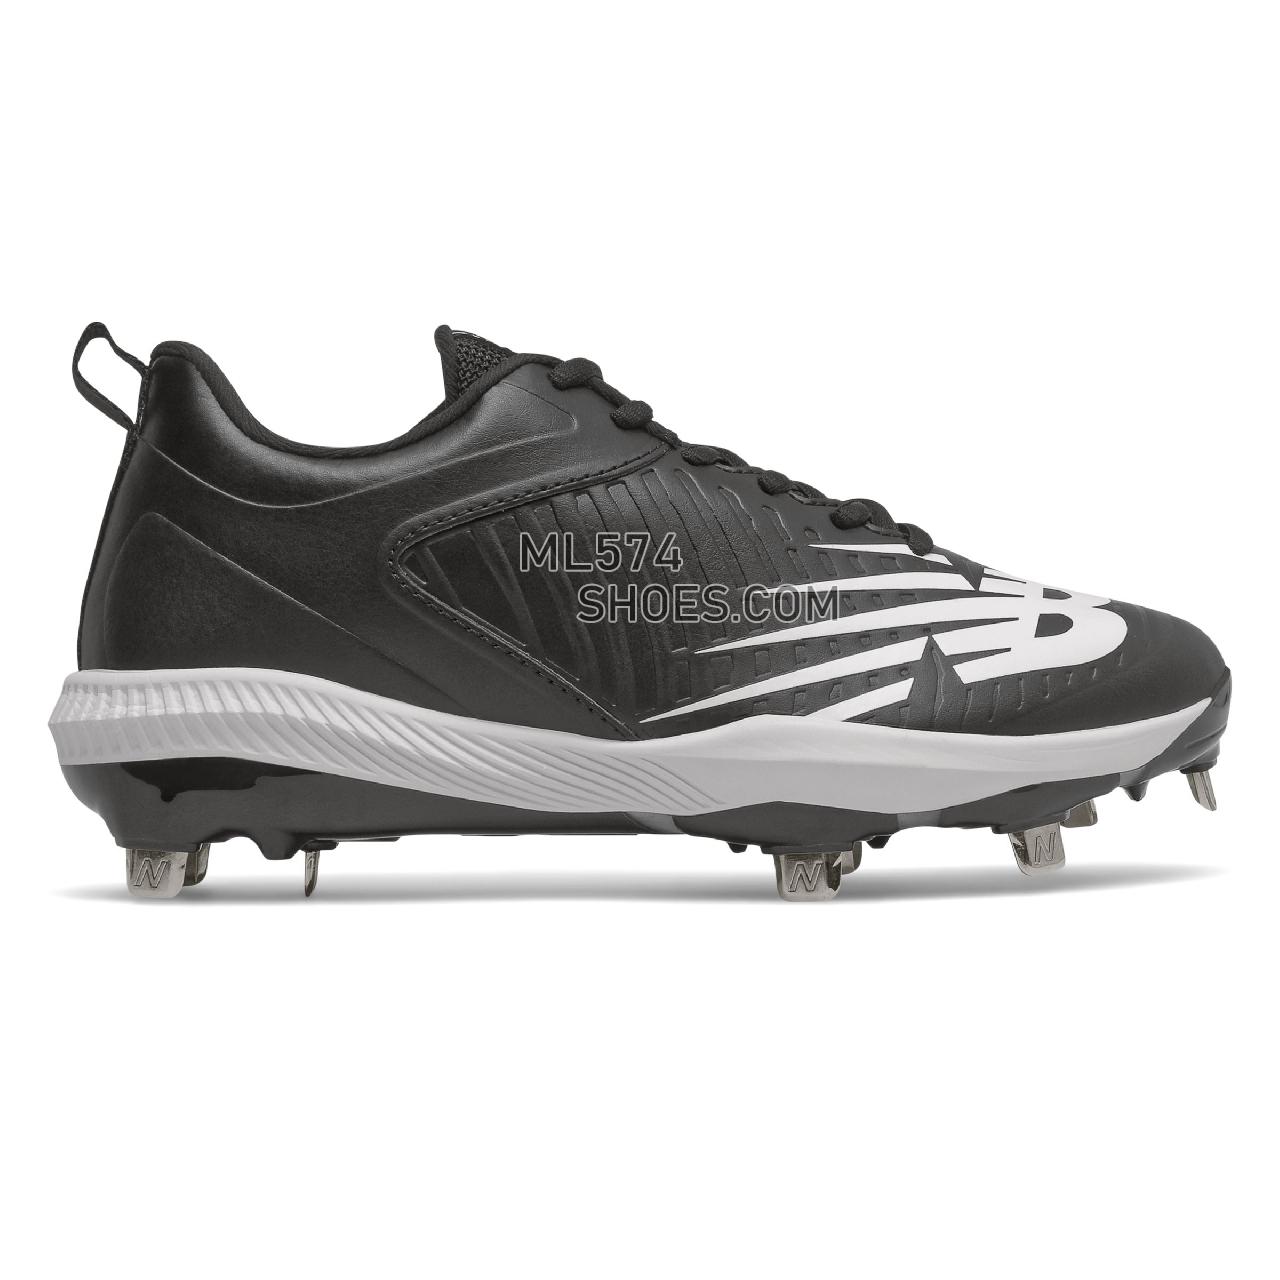 New Balance FuelCell SMFUSEv3 - Women's Softball - Black with White - SMFUSEK3